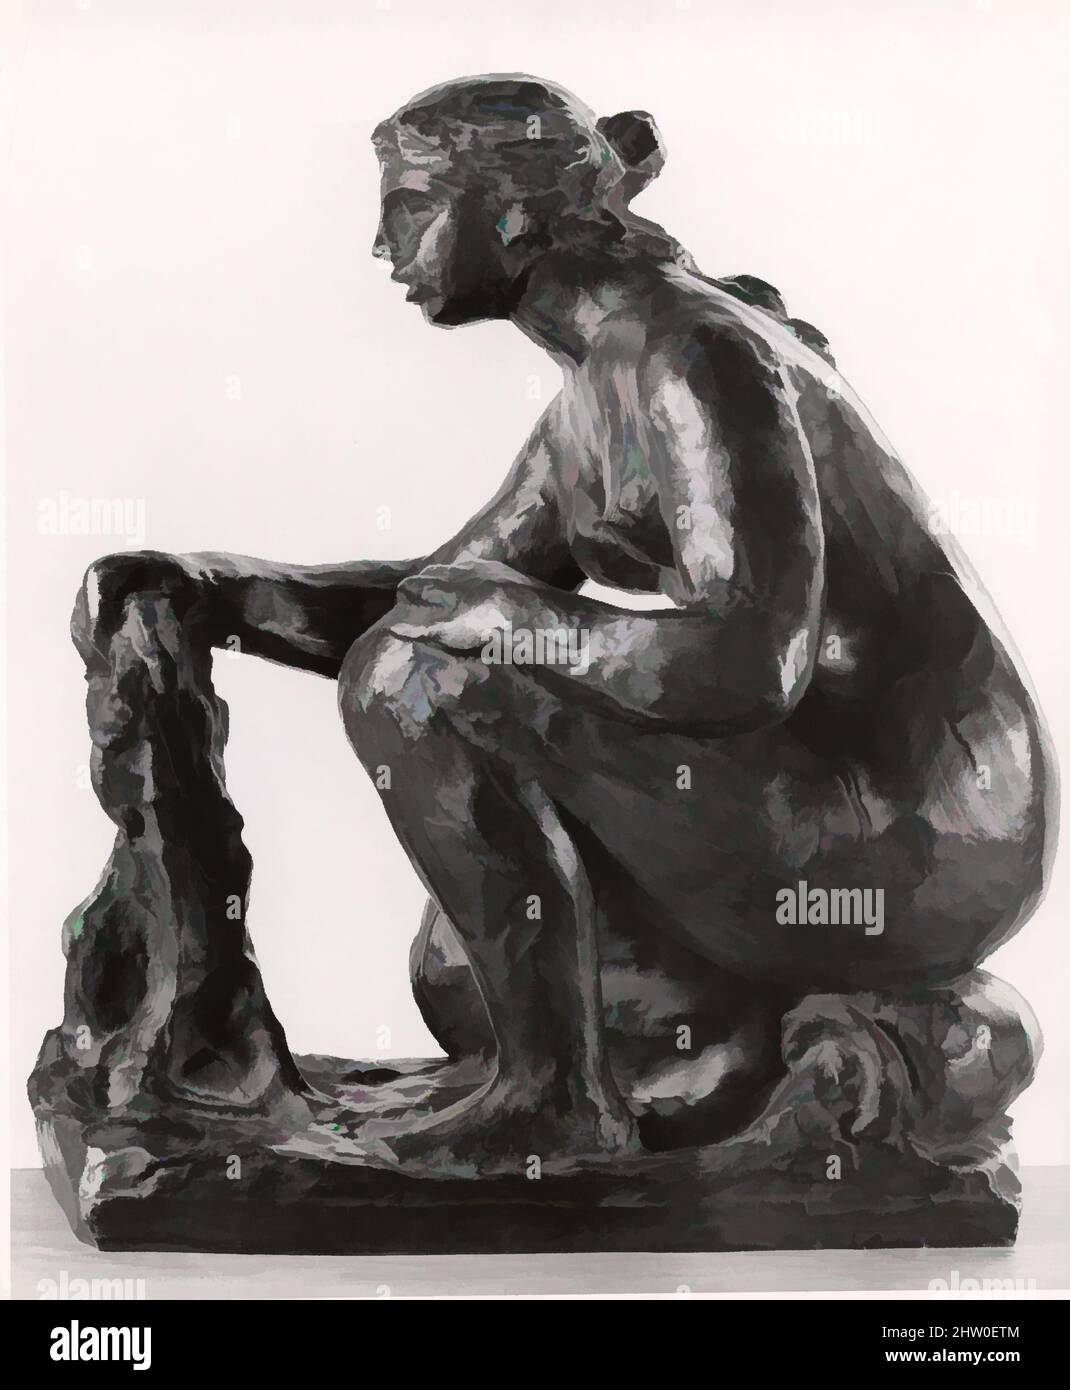 Art inspired by Washerwoman, 1916, Bronze, 13 1/4 x 11 1/2 x 6 in. (33.7 x 29.2 x 15.2 cm), Sculpture, Auguste Renoir (French, Limoges 1841–1919 Cagnes-sur-Mer, Classic works modernized by Artotop with a splash of modernity. Shapes, color and value, eye-catching visual impact on art. Emotions through freedom of artworks in a contemporary way. A timeless message pursuing a wildly creative new direction. Artists turning to the digital medium and creating the Artotop NFT Stock Photo